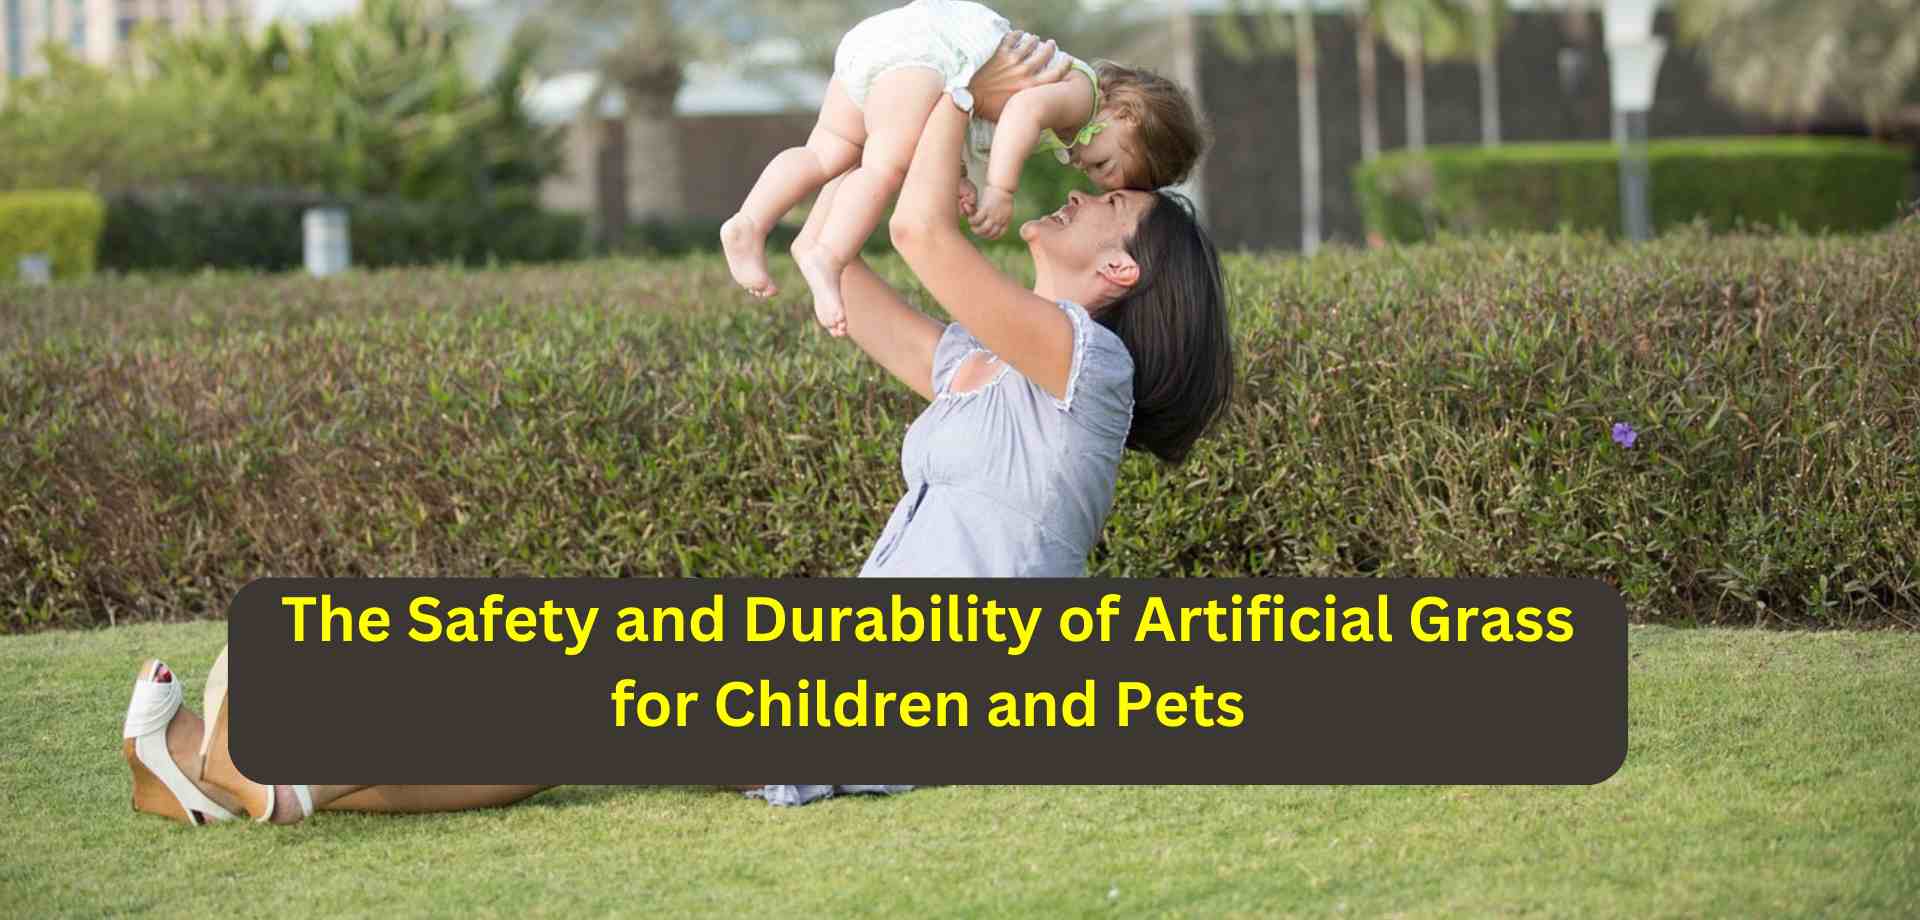 Safety and Durability of Artificial Grass for Children and Pets